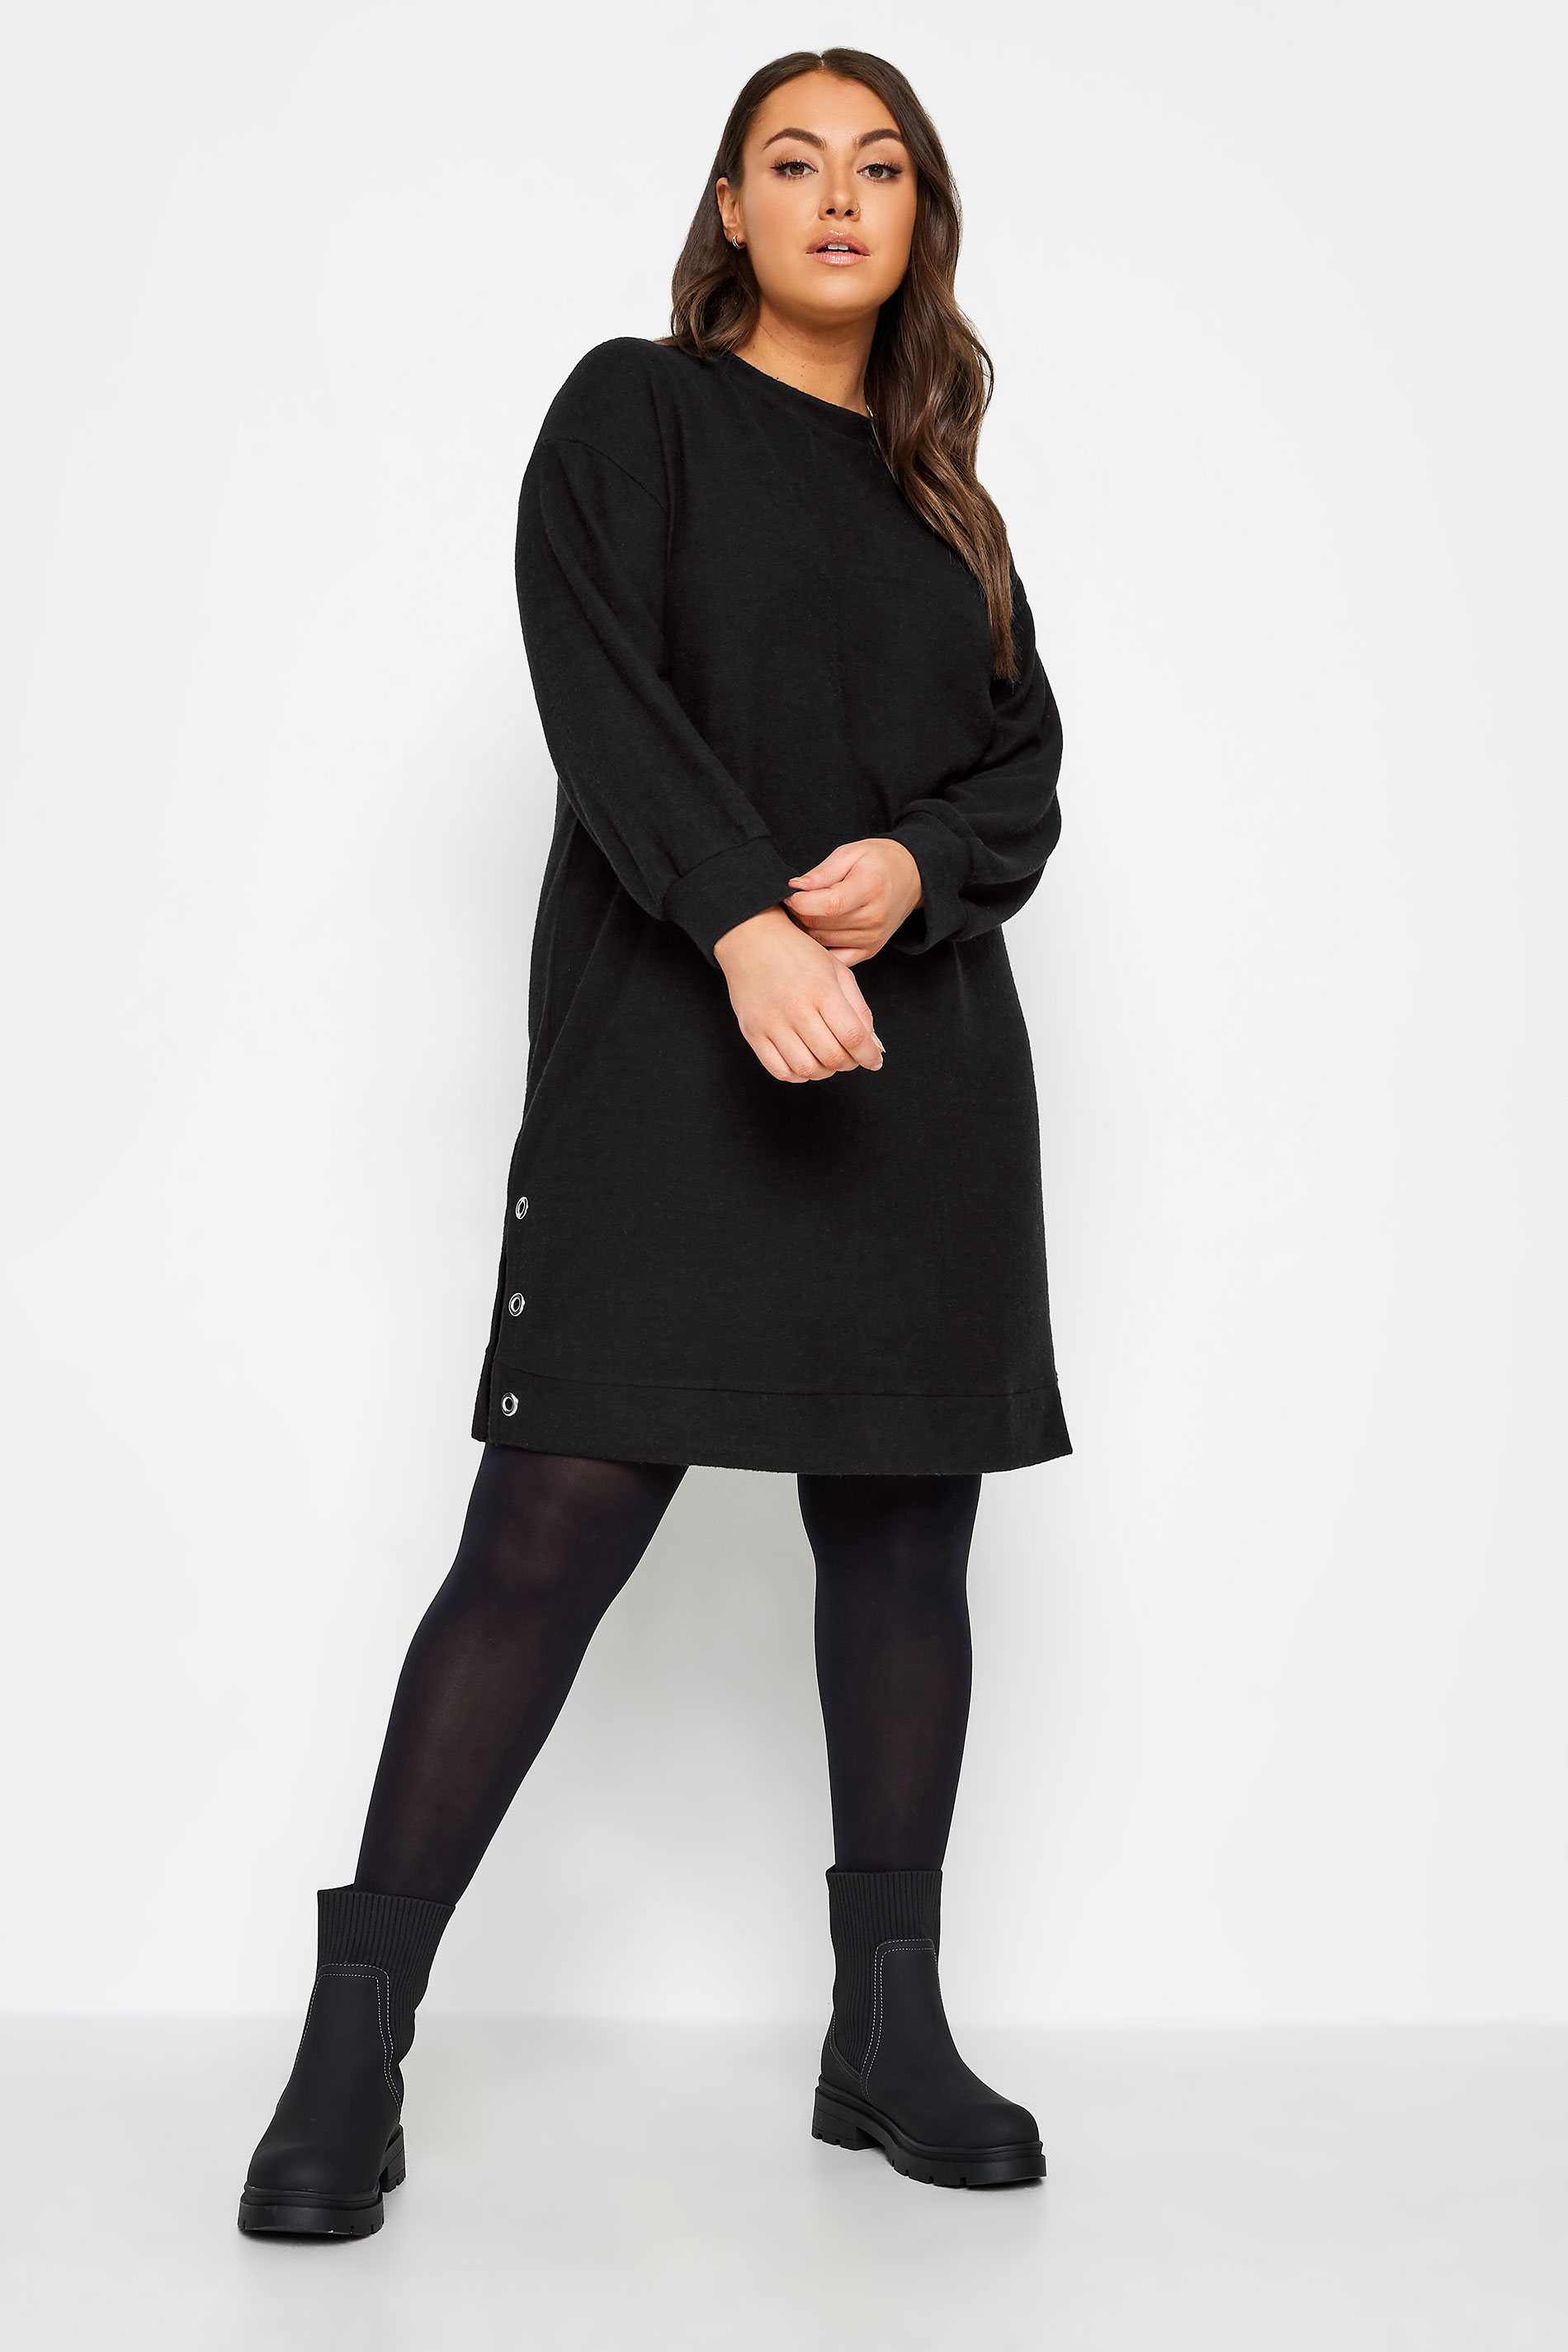 YOURS Plus Size Black Eyelet Detail Soft Touch Jumper Dress | Yours Clothing 1